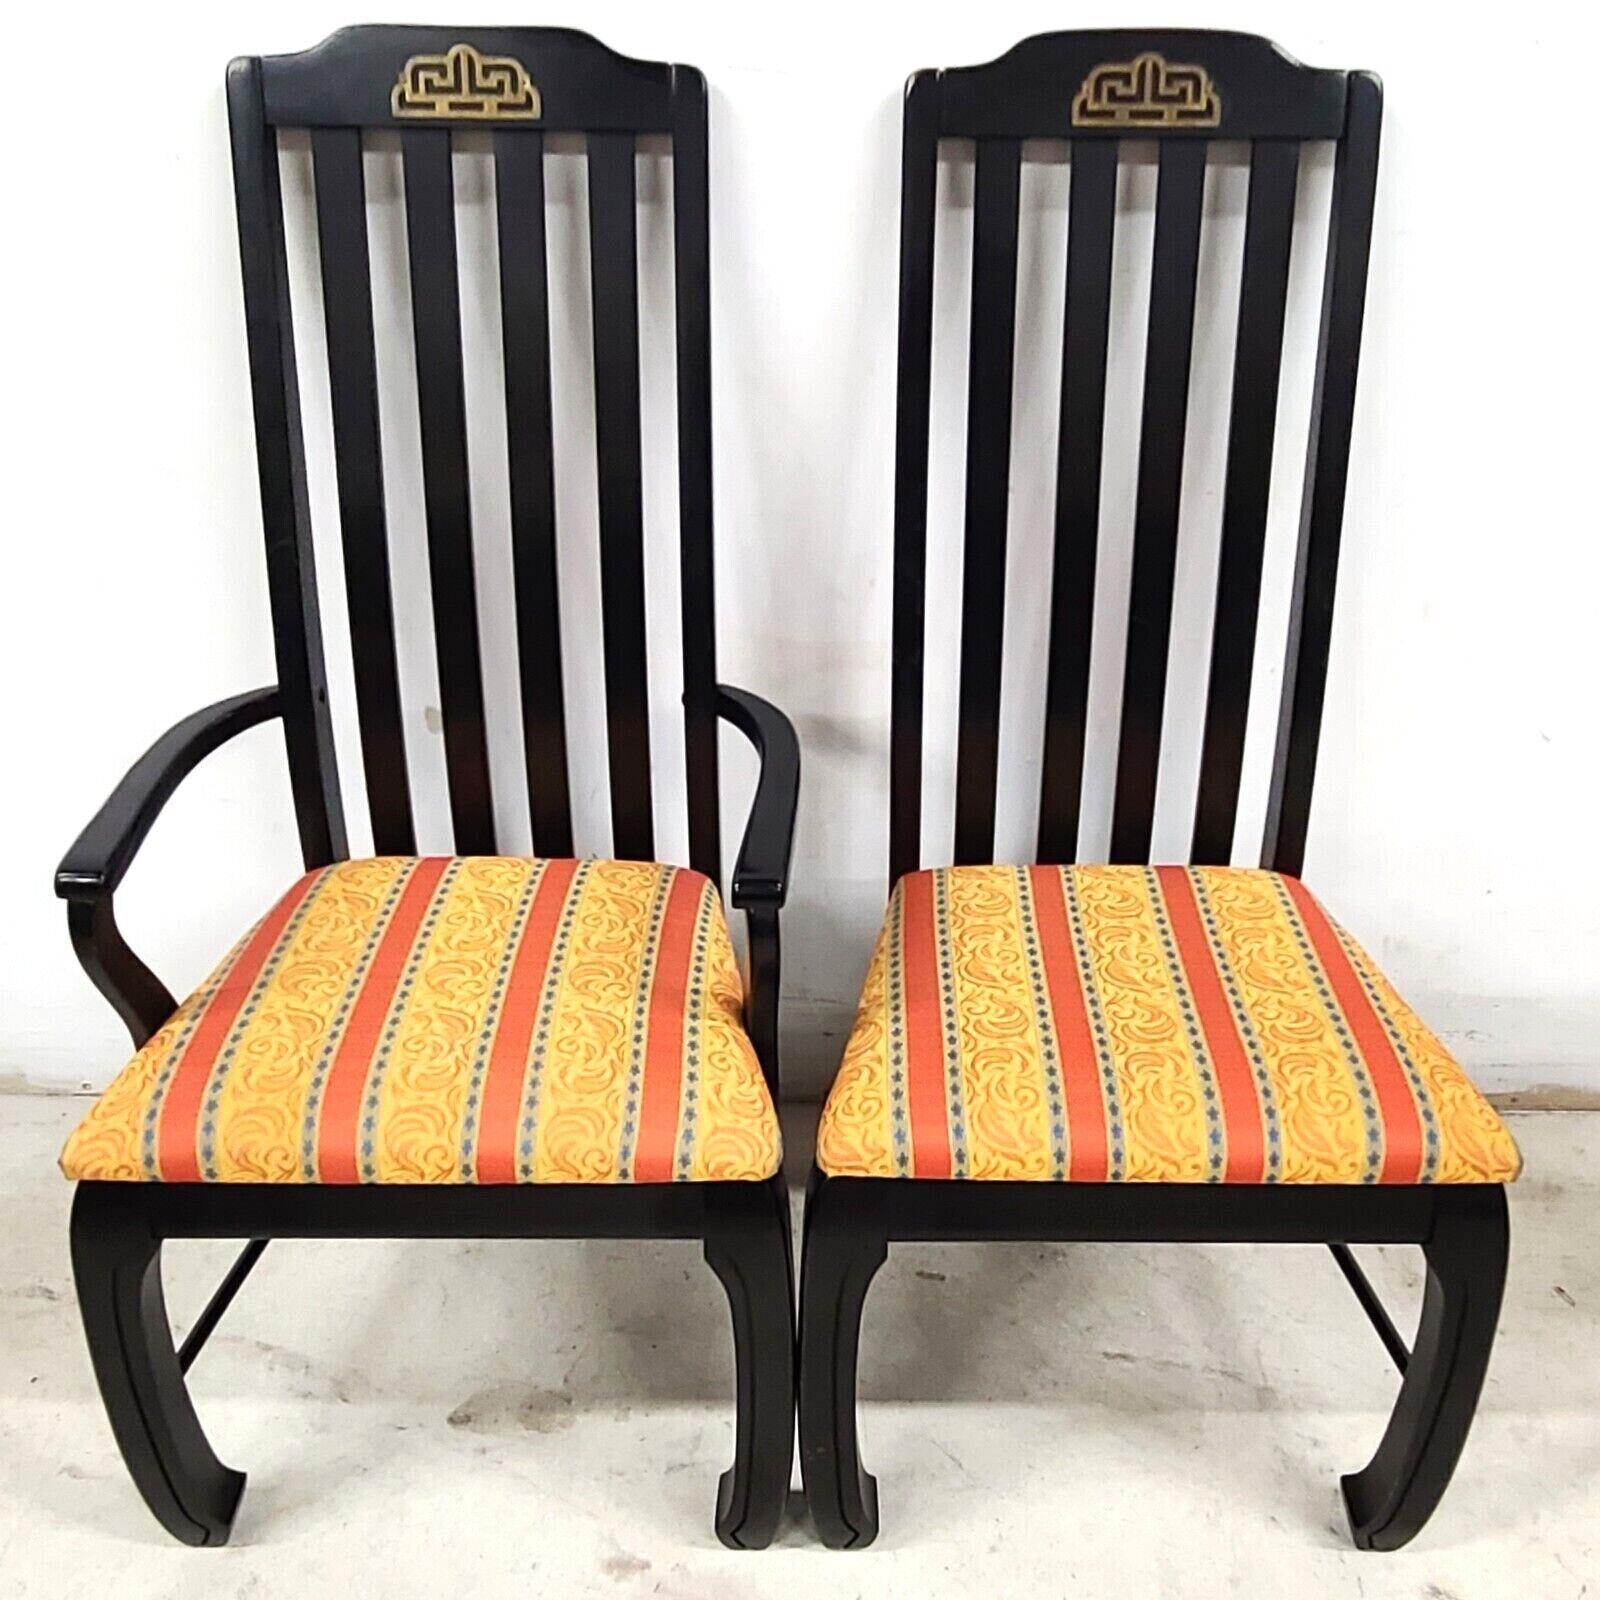 Offering One Of Our Recent Palm Beach Estate Fine Furniture Acquisitions Of A 
Set of 8 Solid Wood Ming Chinoiserie Dining Chairs 
Set includes 2 arm and 6 side chairs.

Approximate Measurements in Inches
Armchairs:
45